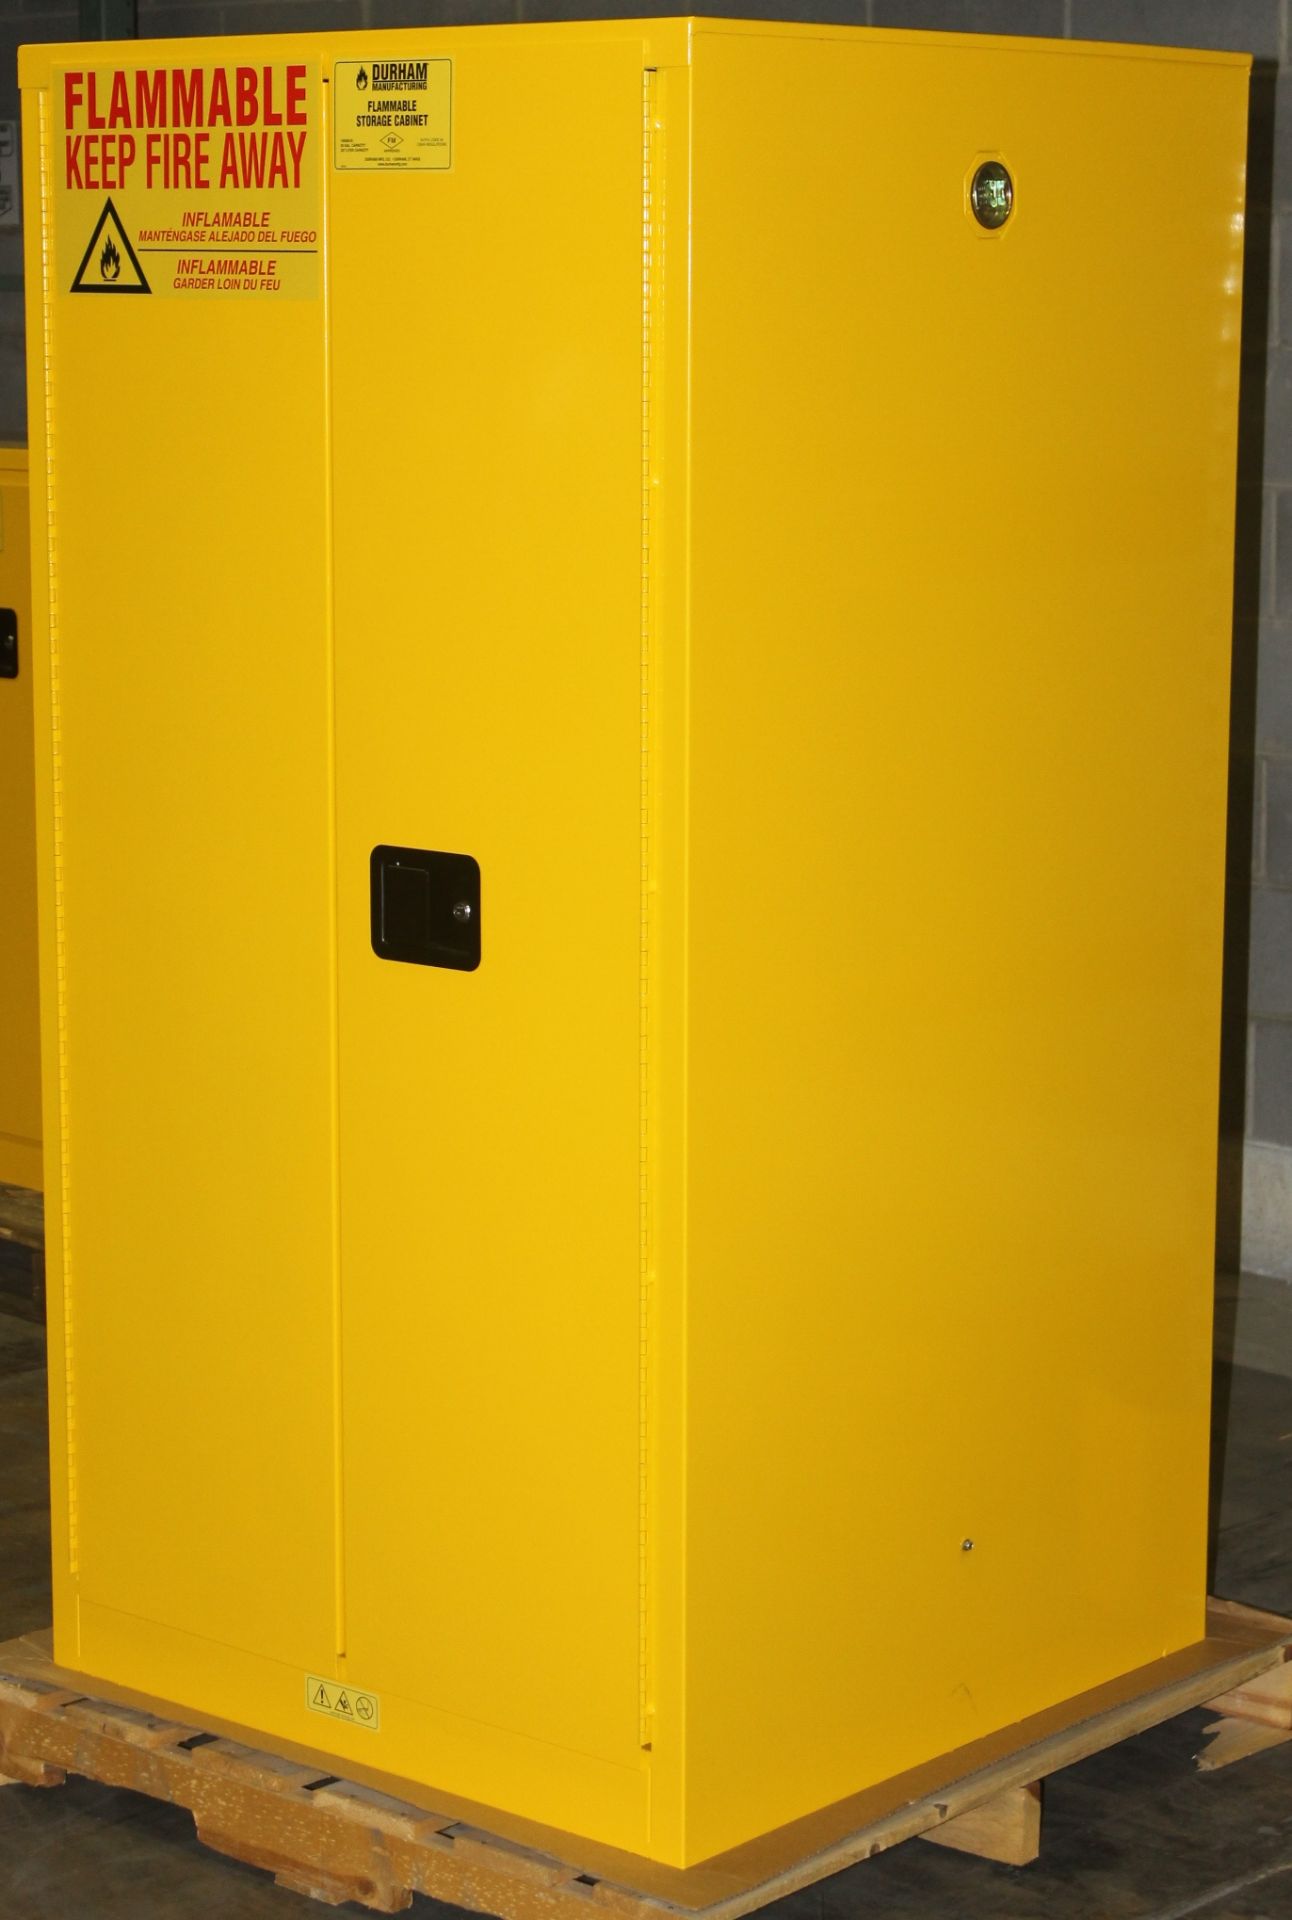 60 GALLONS FLAMMABLE SAFETY STORAGE CABINET,  NEW NEVER USED MODEL: 1060M-50 2 SHELVES 60 GALLONS - Image 3 of 4